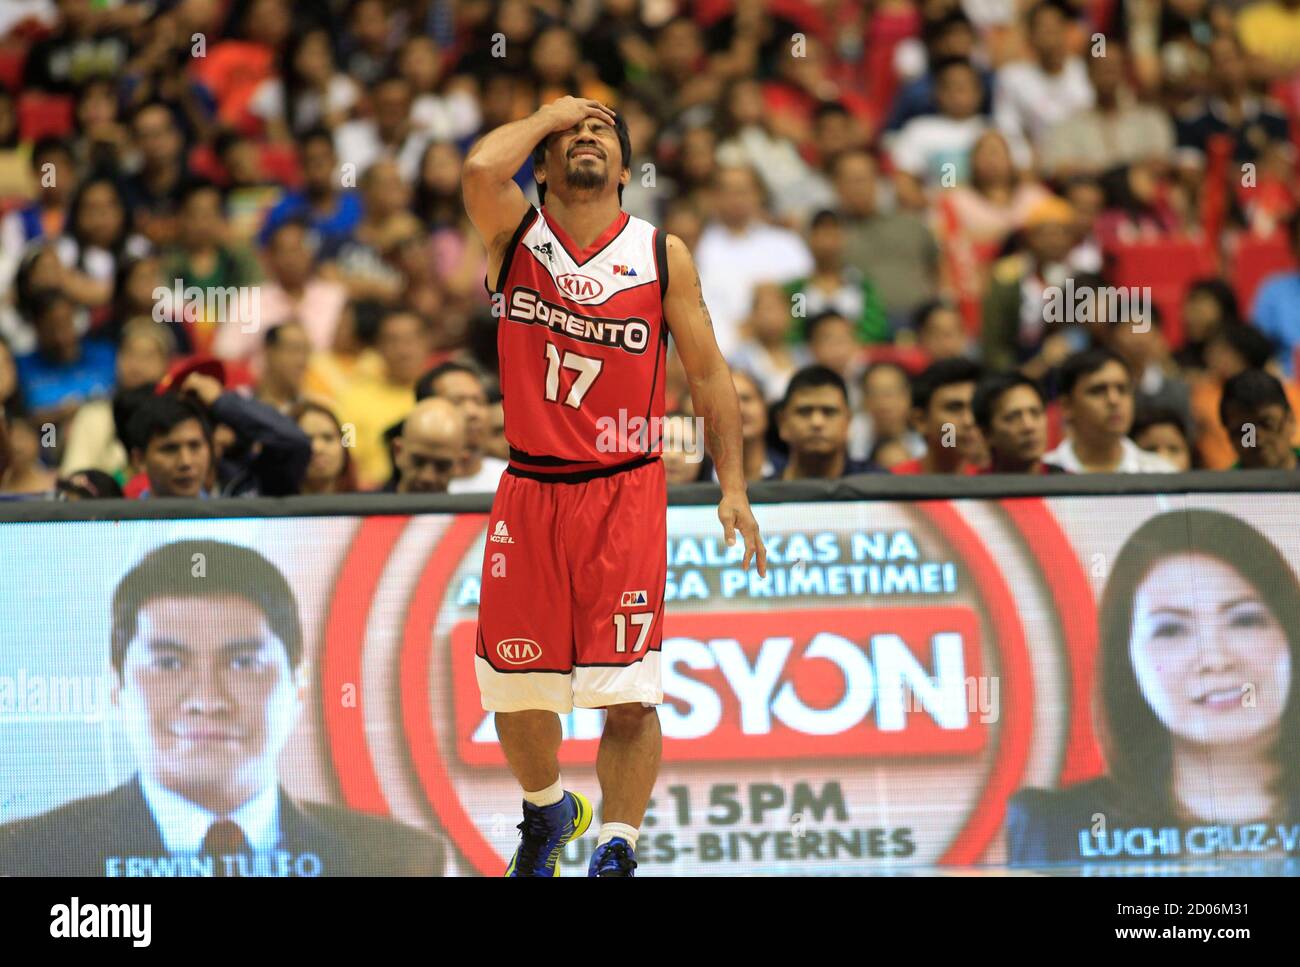 Manny Pacquiao, the playing coach of KIA-Sorento, reacts as he calls for a  foul during the first quarter of a basketball match against the  Blackwater-Elite during the 40th Season of the Philippine